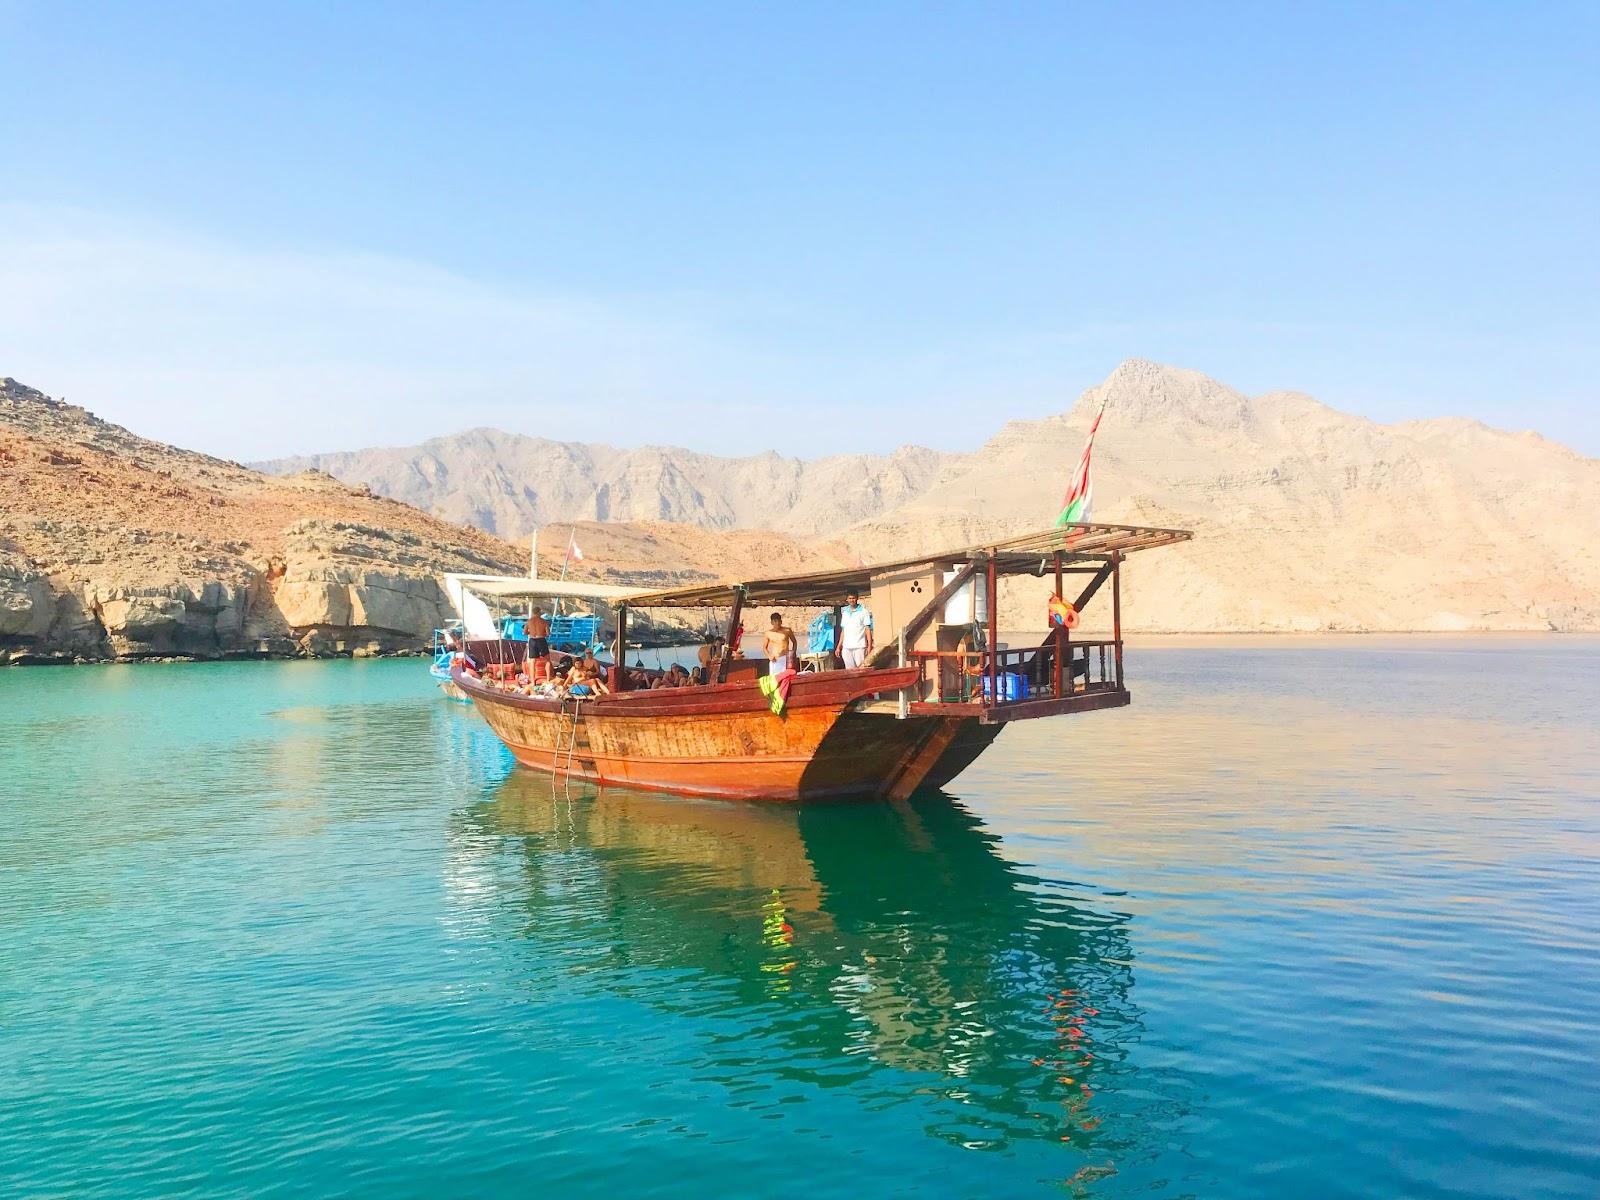  boat on the water in Khasab, Oman